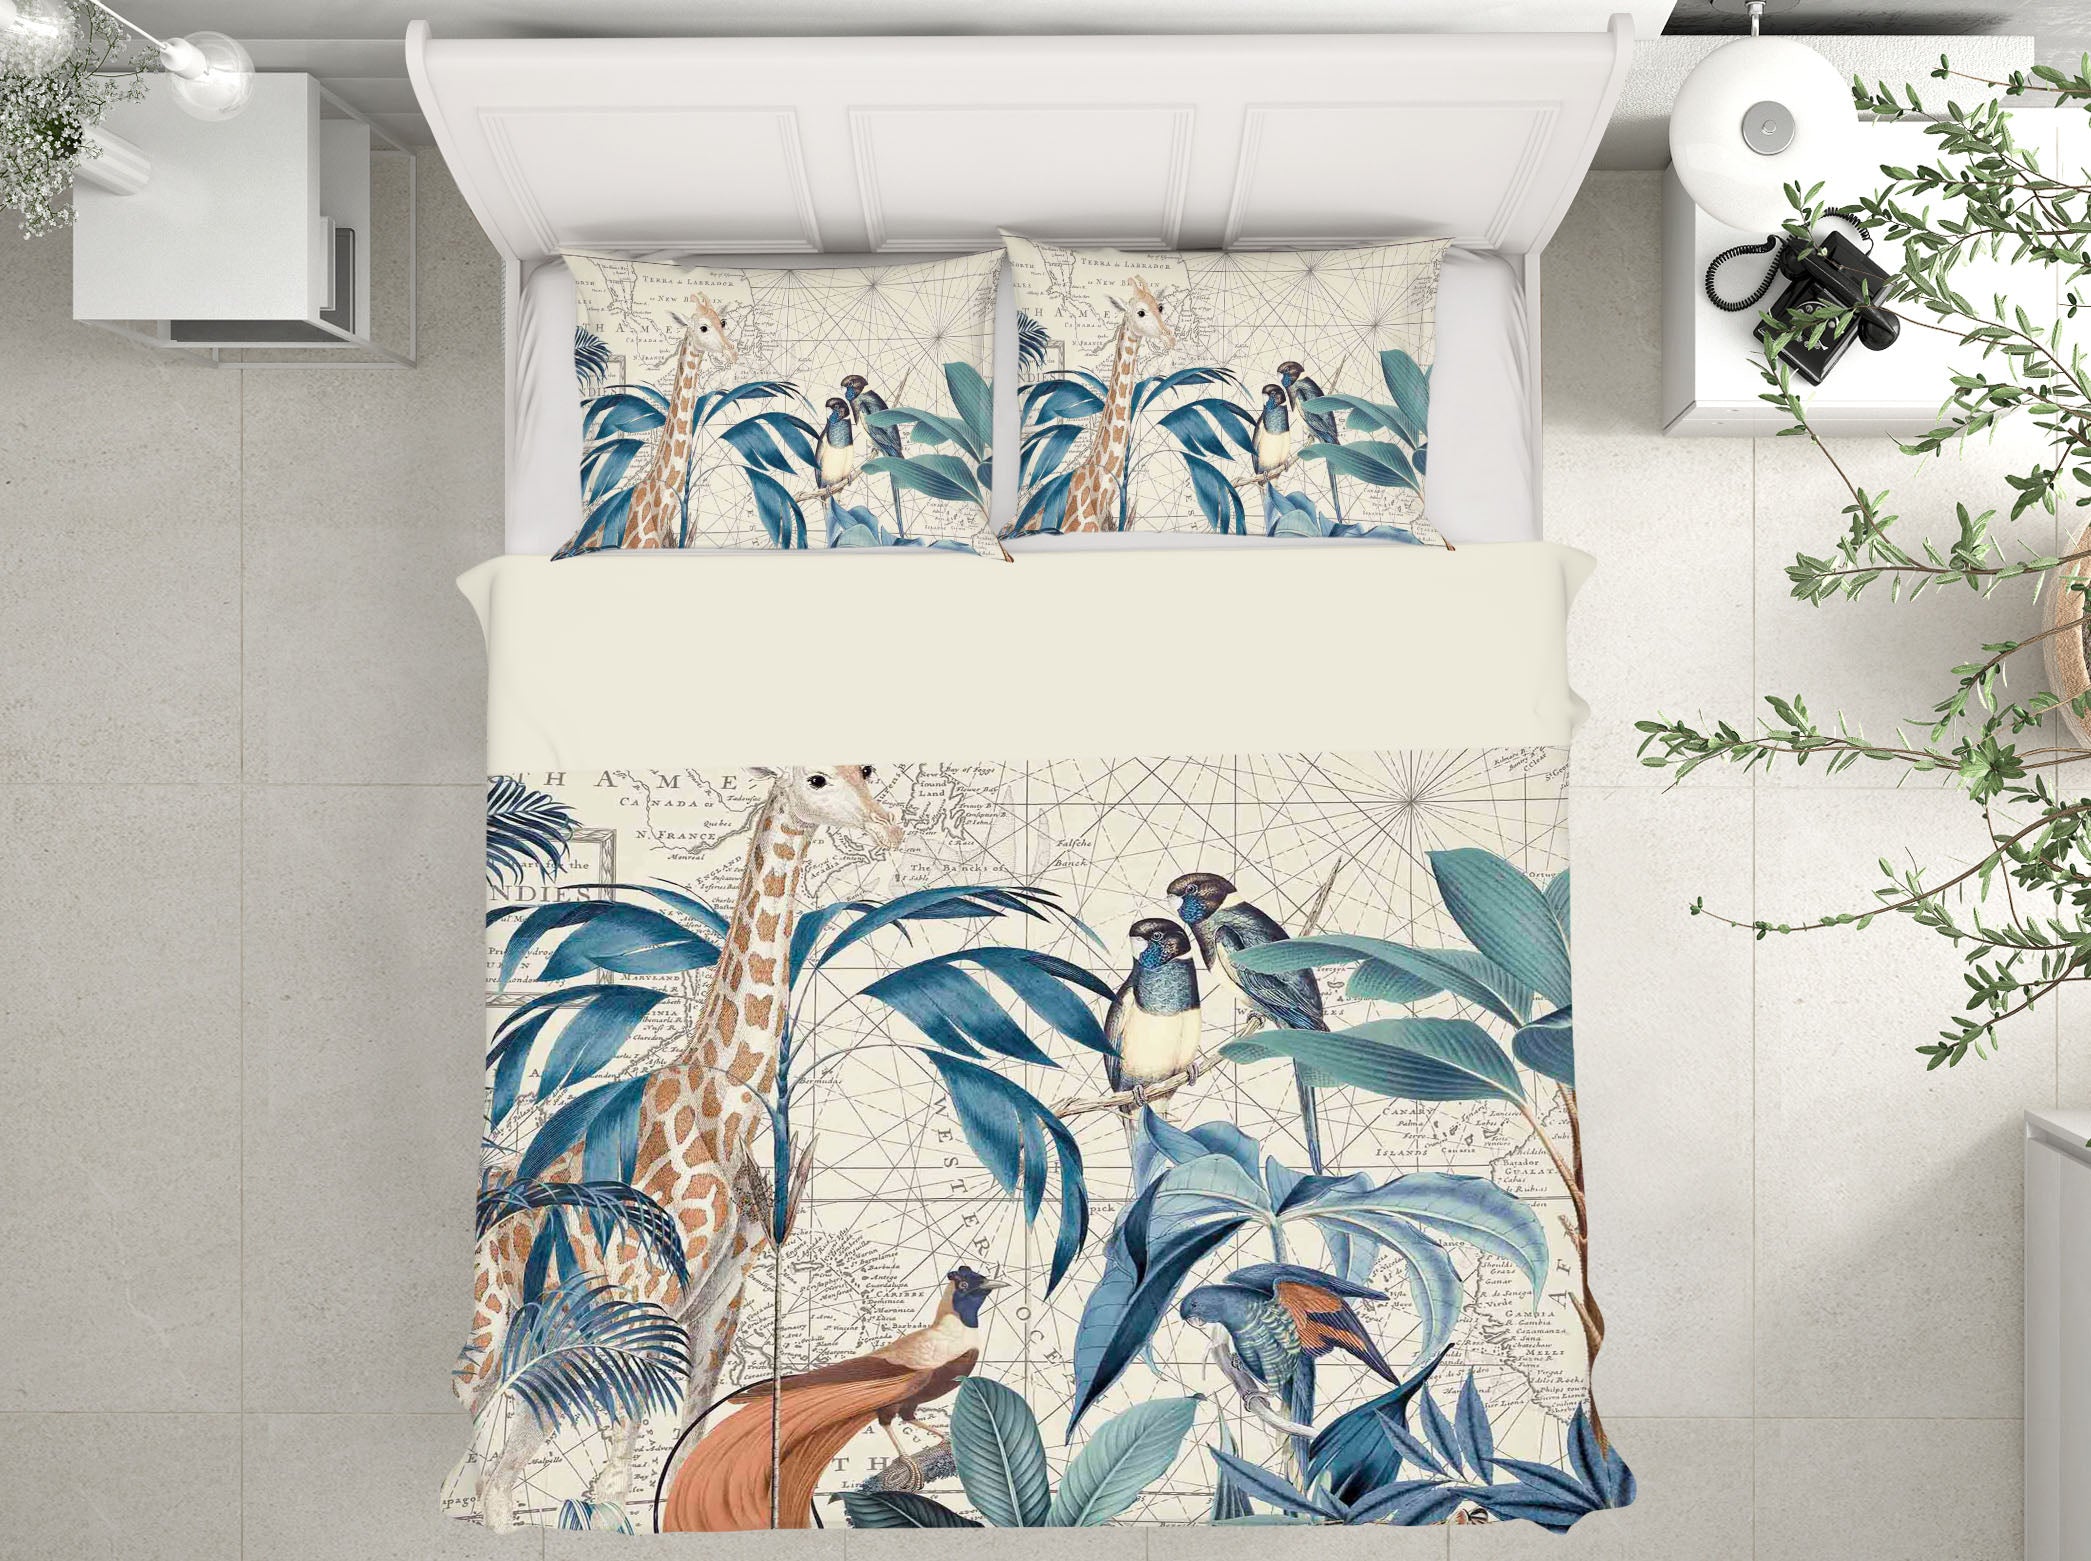 3D Palm Tree Map 2146 Andrea haase Bedding Bed Pillowcases Quilt